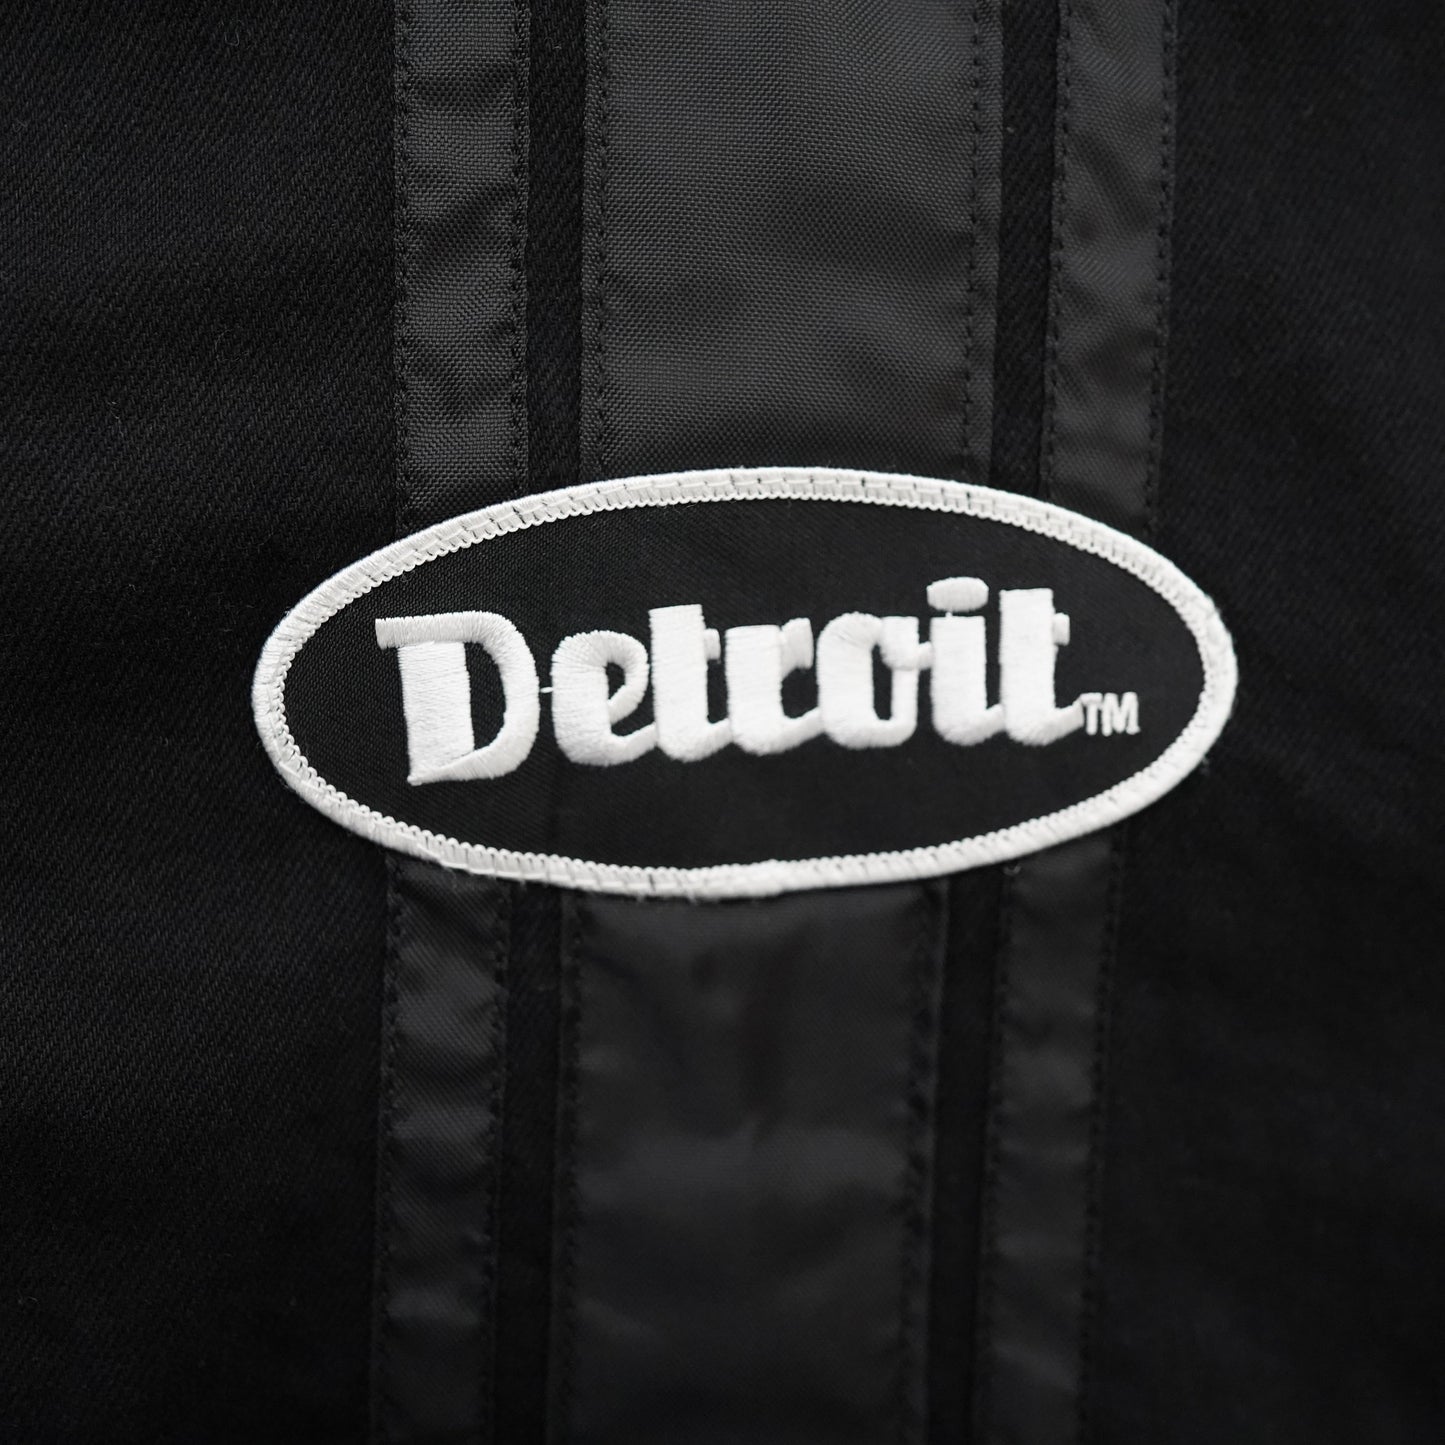 Made In Detroit jacket